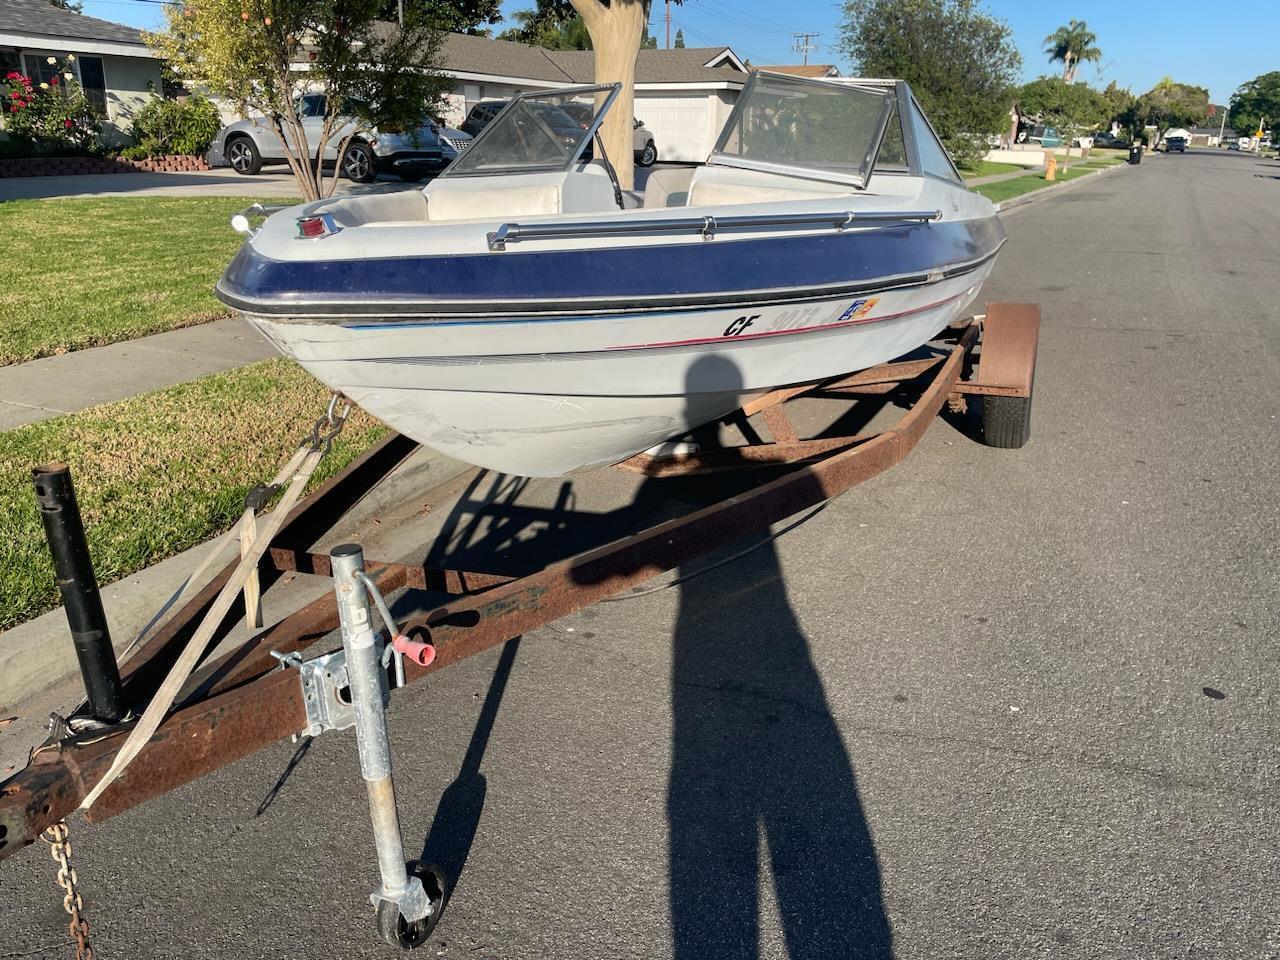 Runabout Boat 16' Boat Located In Garden Grove, CA - Has Trailer